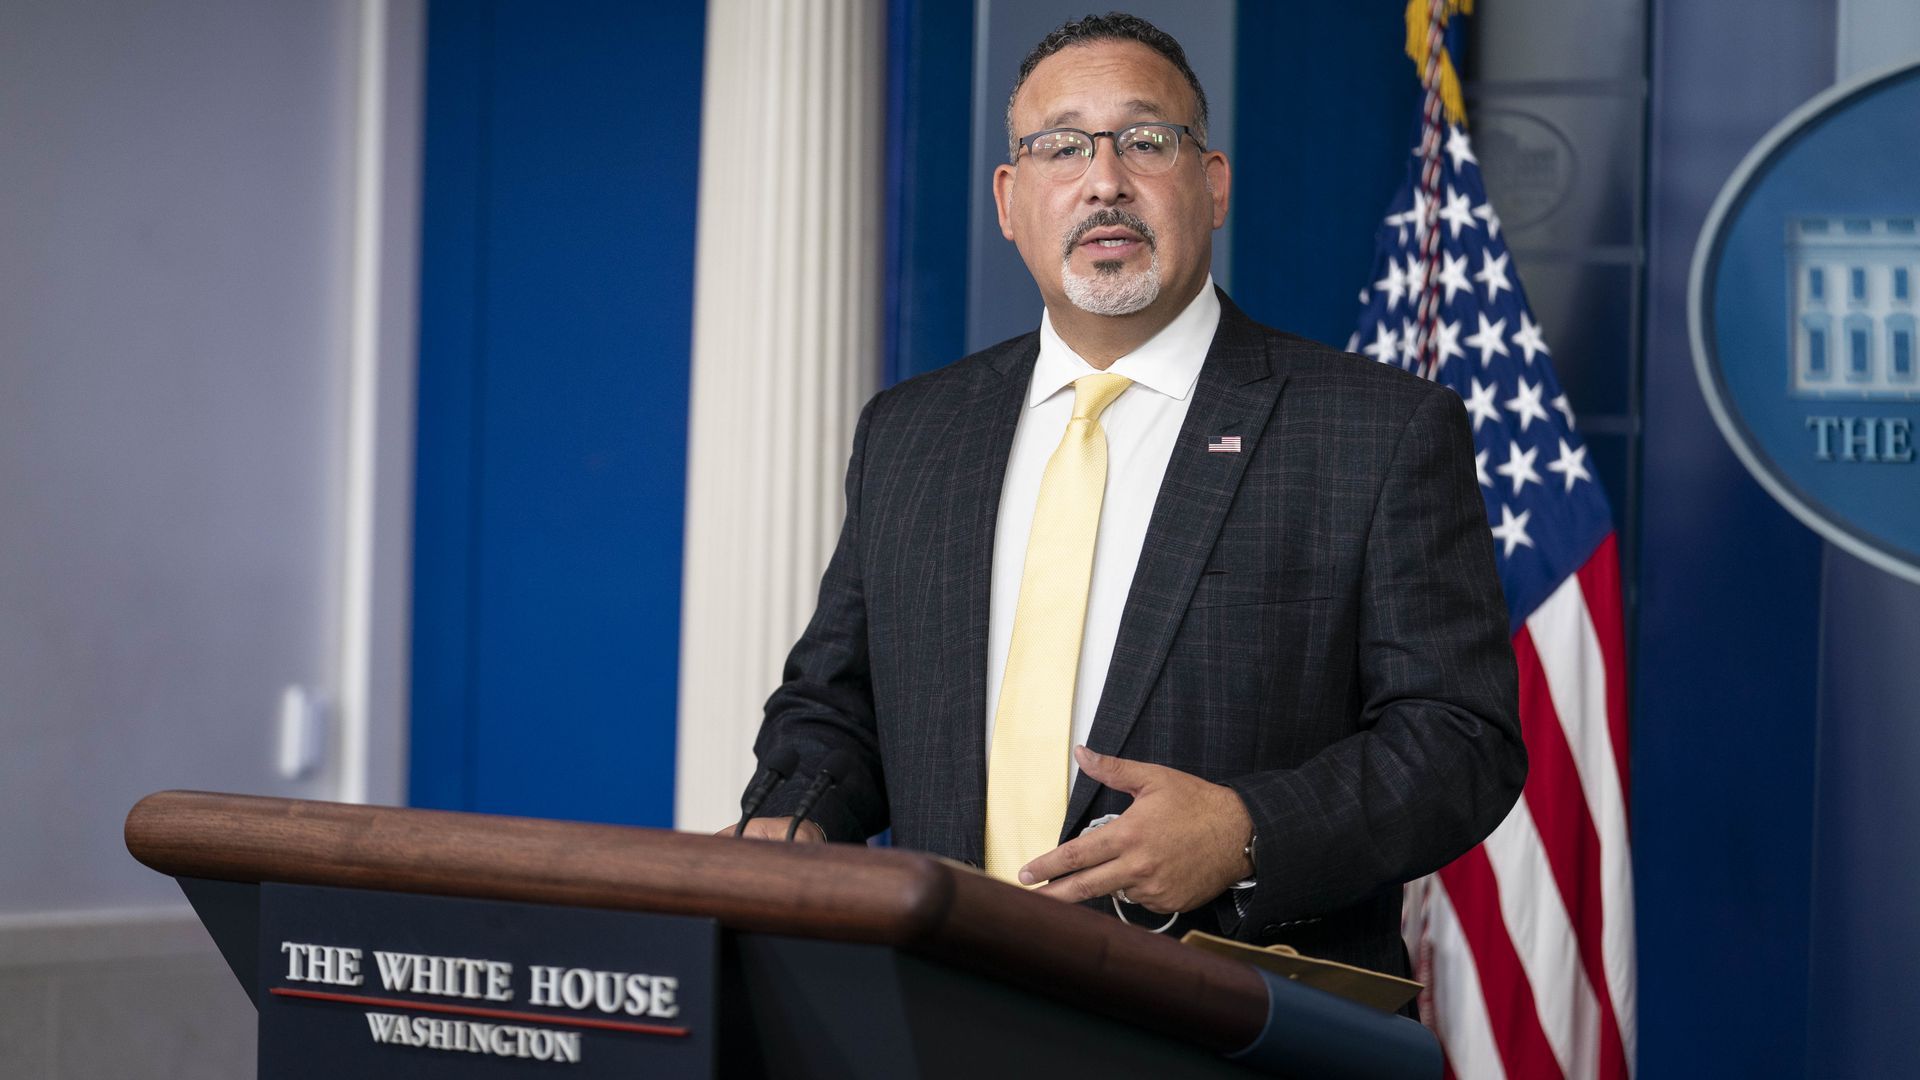 Miguel Cardona, U.S. secretary of education, speaks during a news conference in the James S. Brady Press Briefing Room at the White House in Washington, D.C., U.S., on Thursday, Aug. 5.